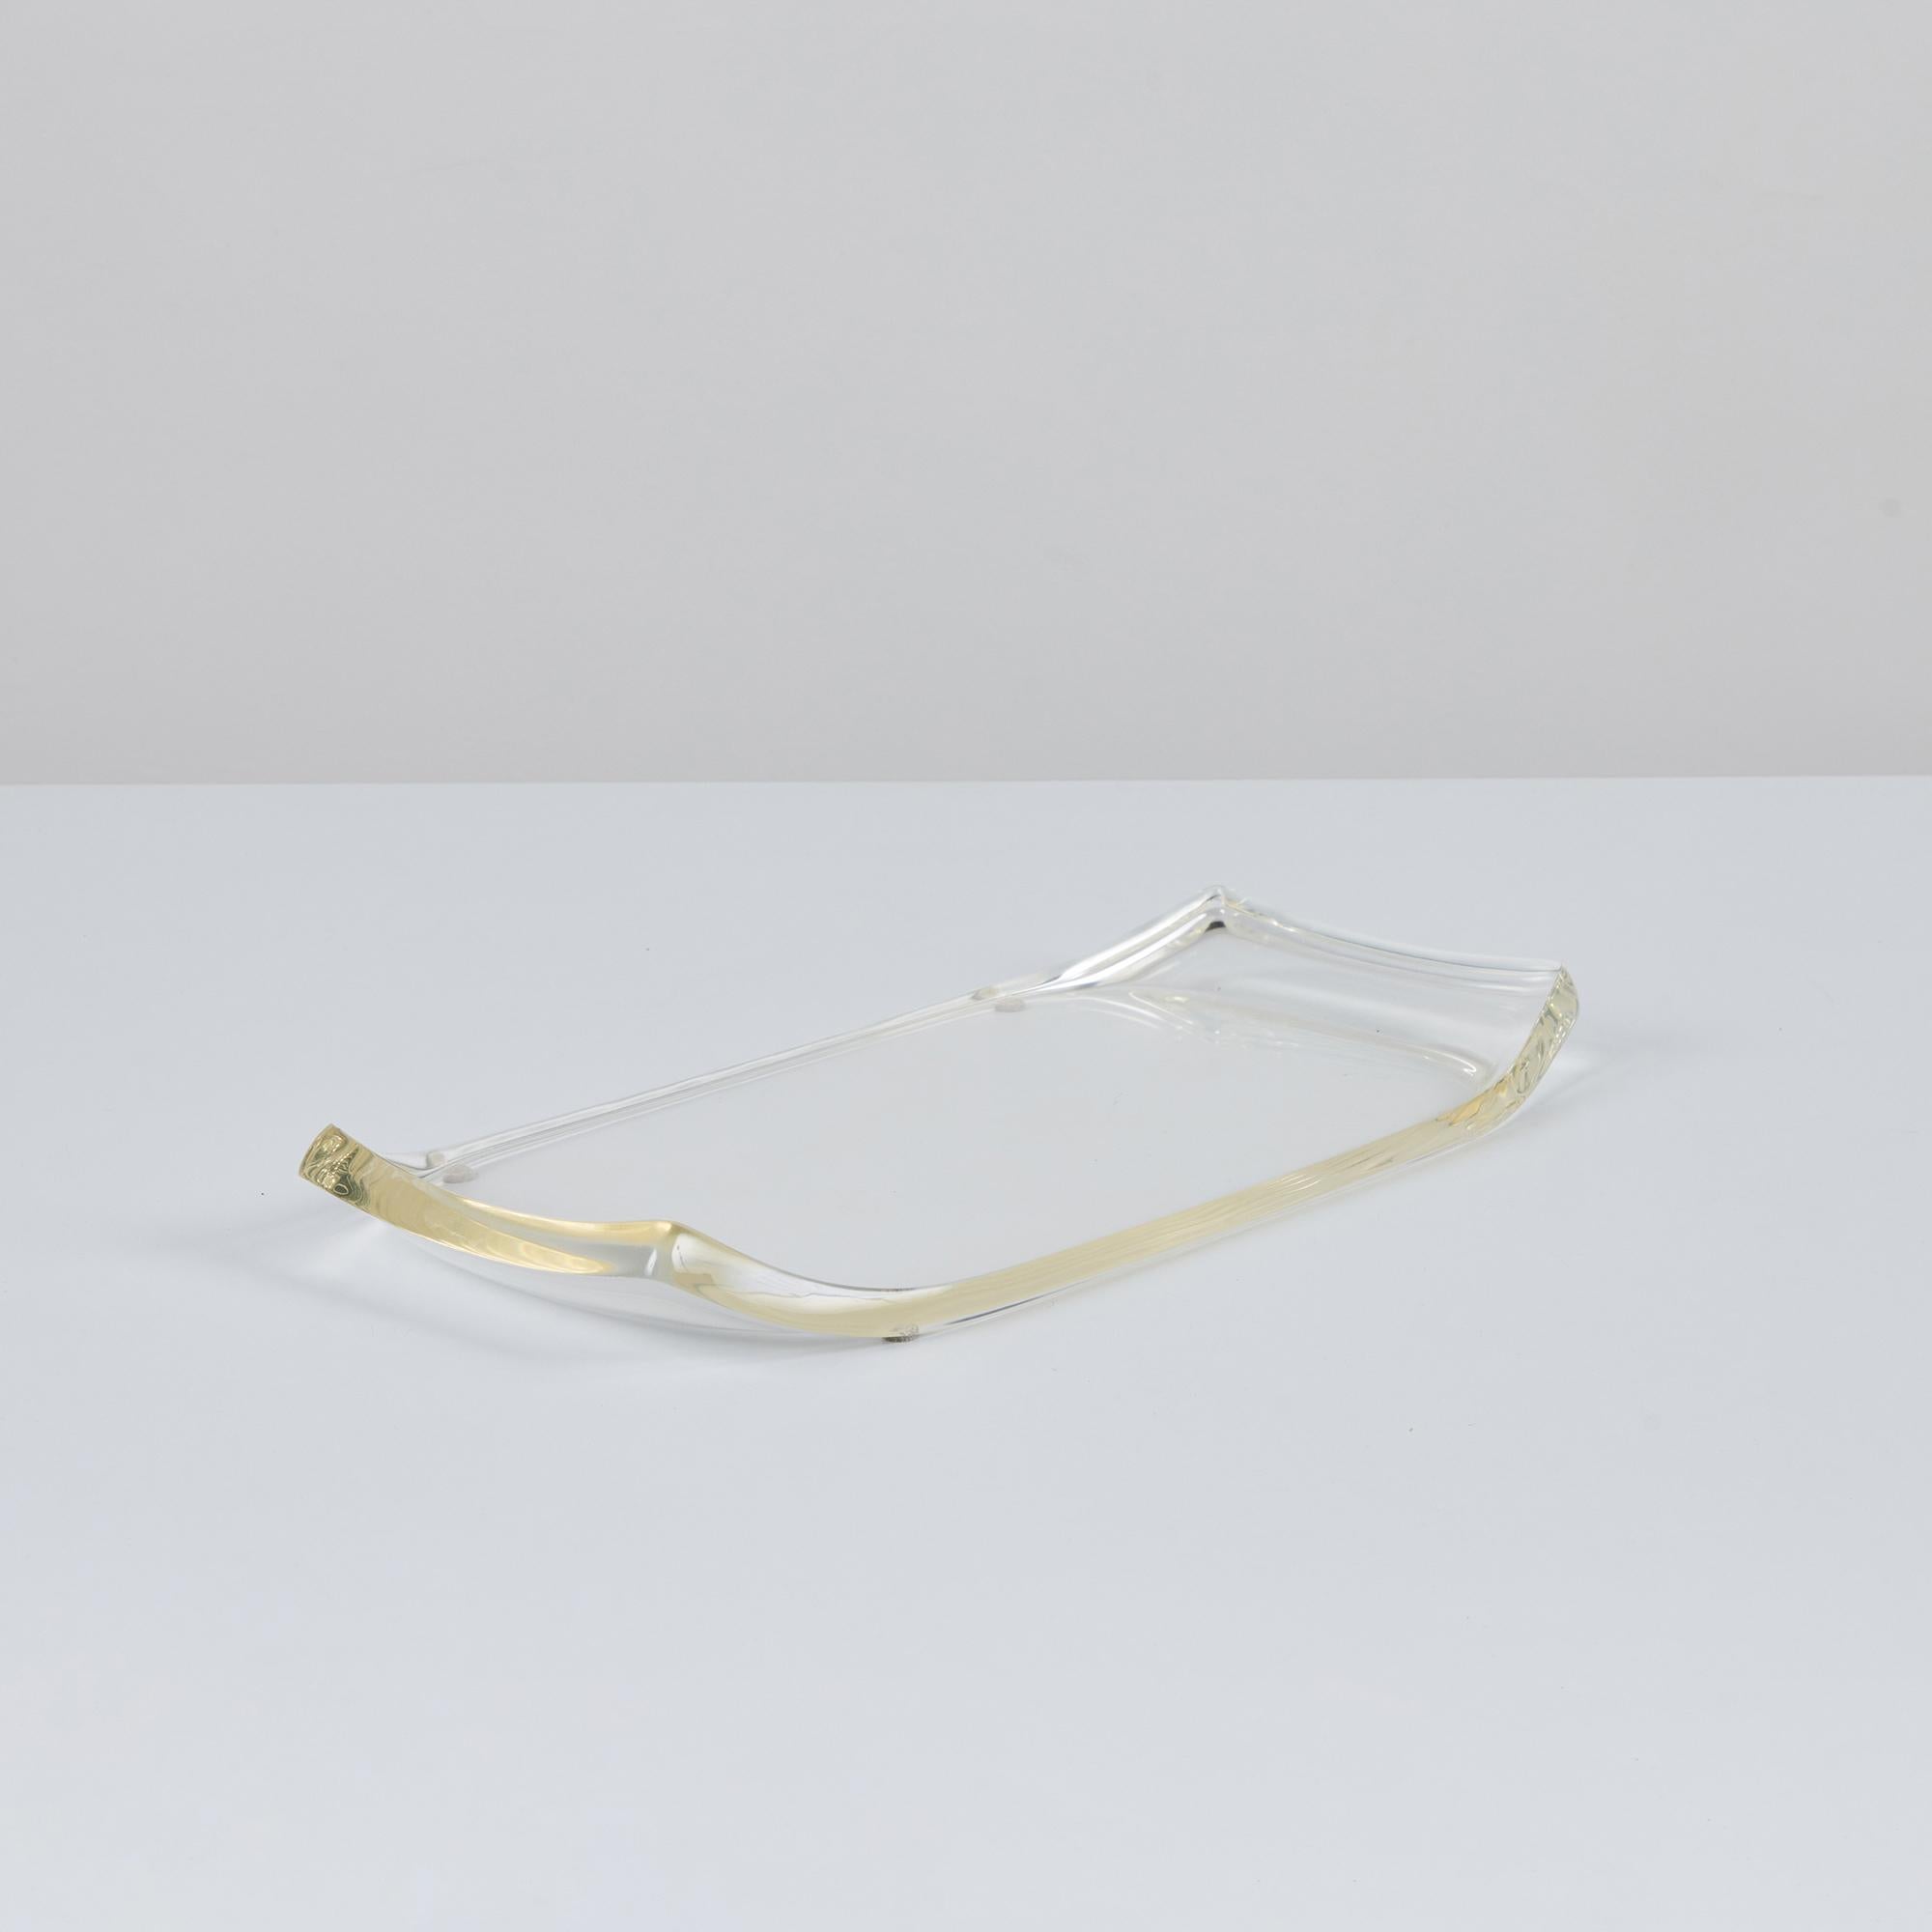 Lucite tray by Ritts Co., c.1970s, USA. The tray features a  rectangular shape with the two longer sides curving upwards.

Dimensions
16